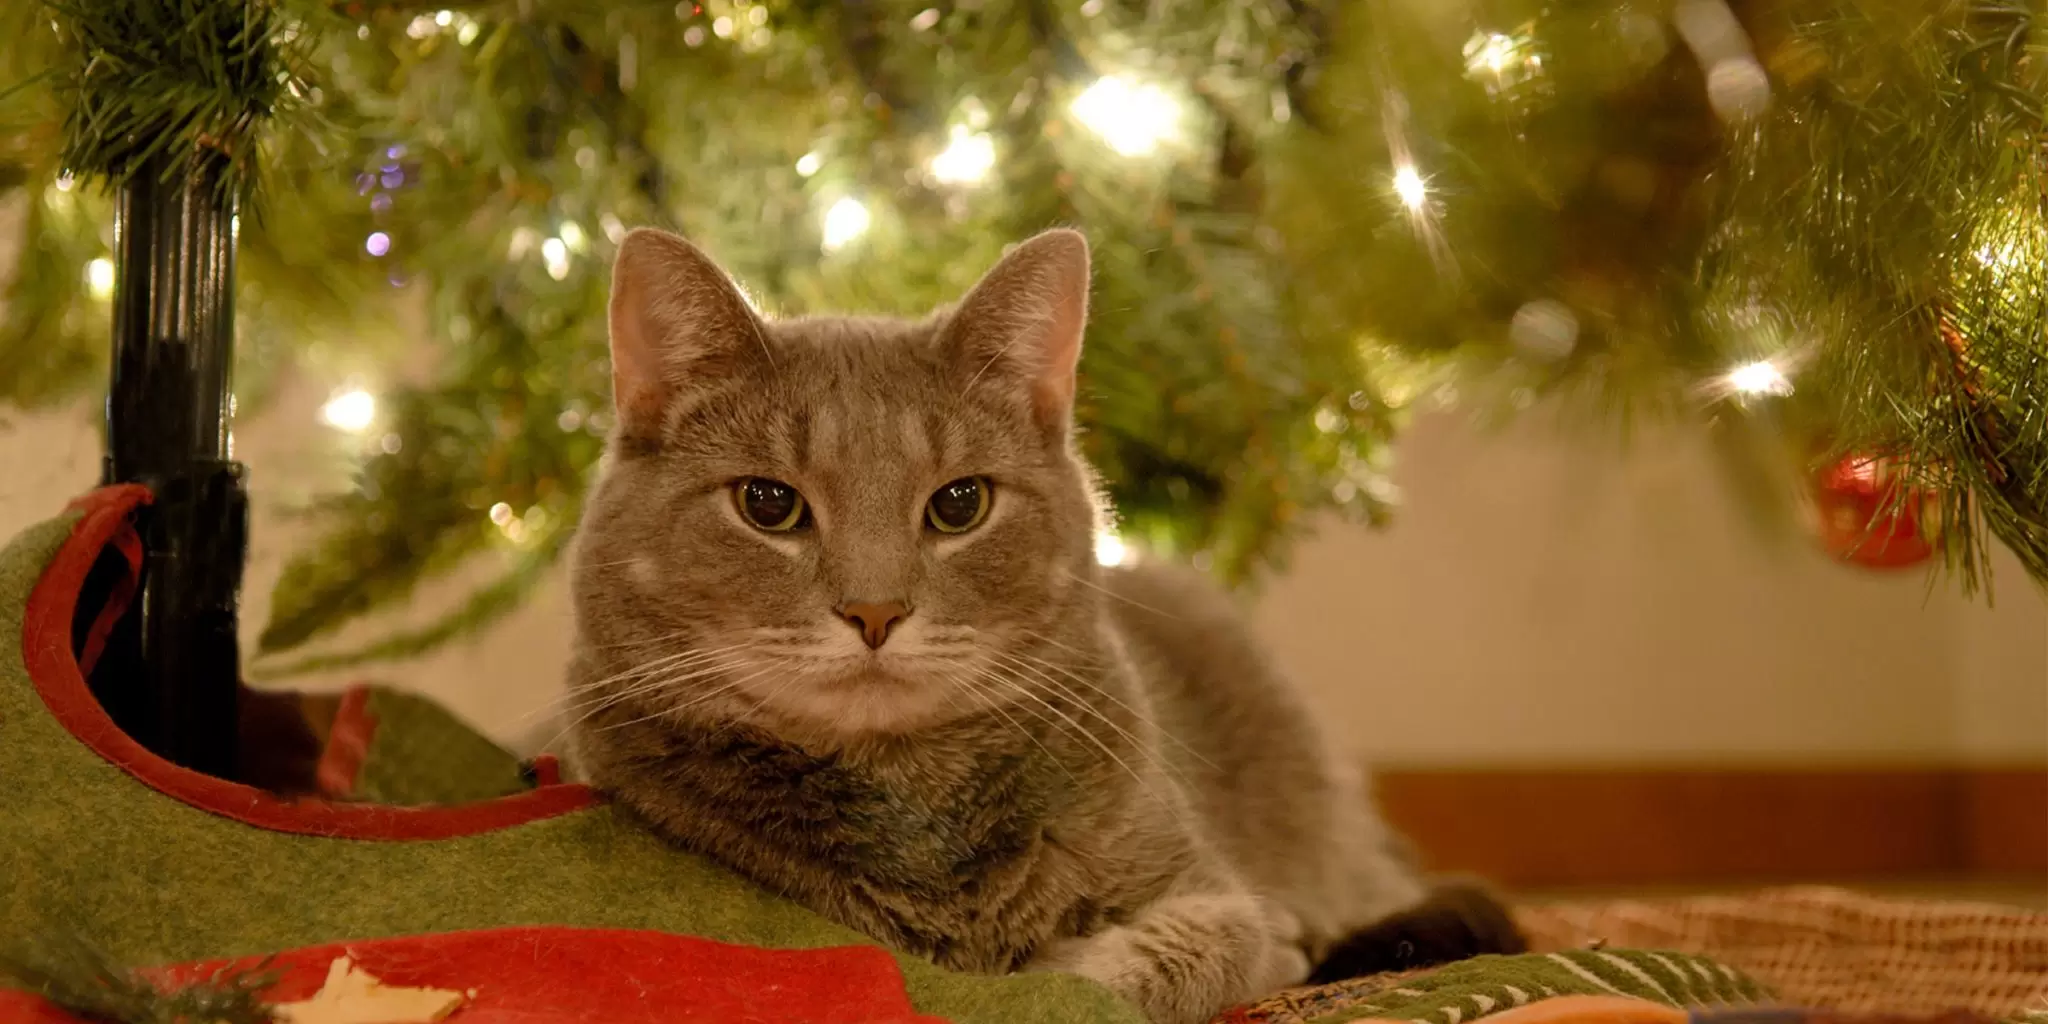 Cat Chewing On Artificial Christmas Tree?